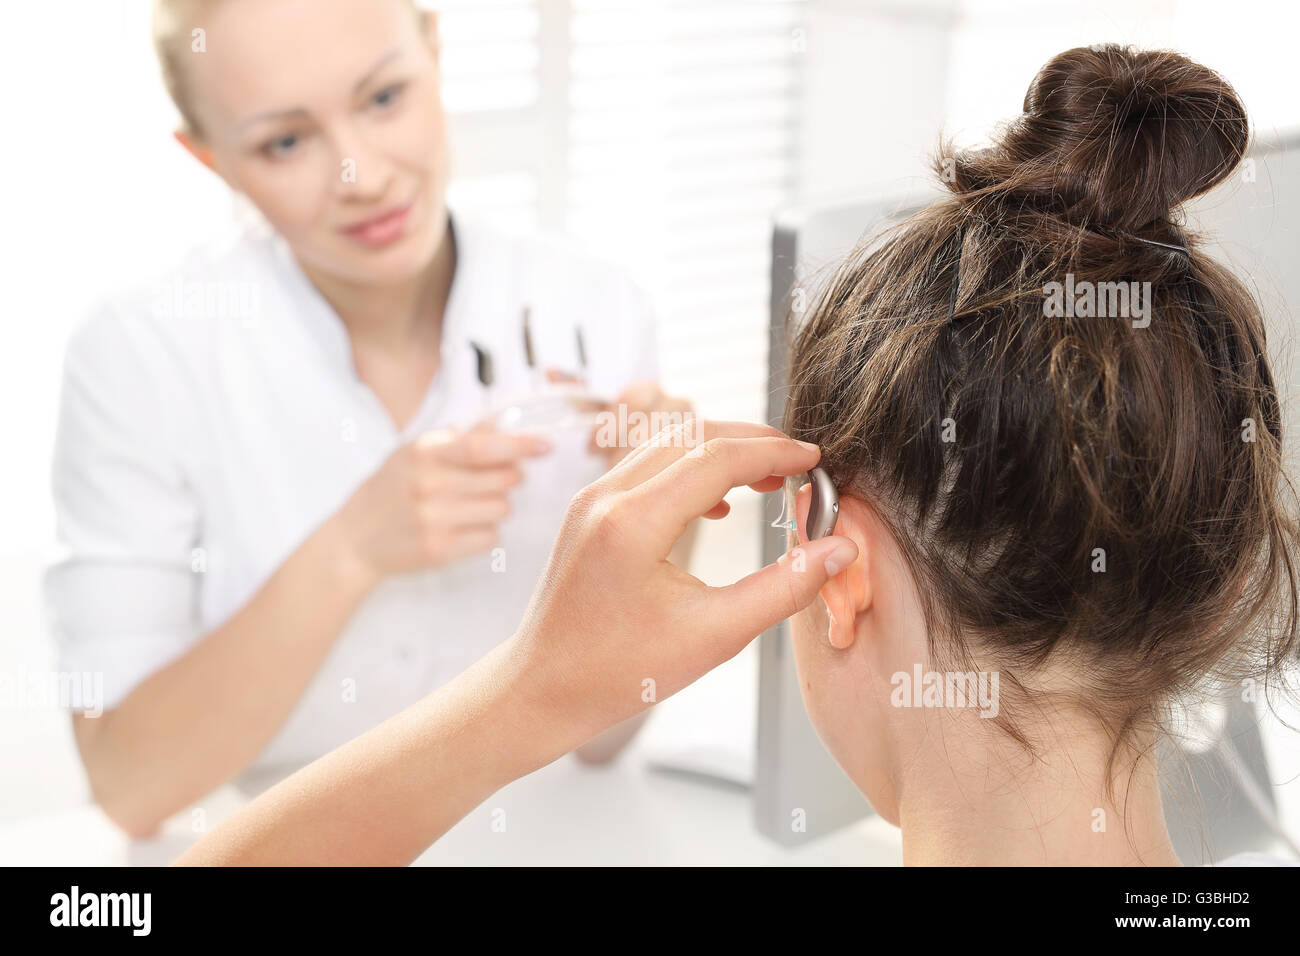 A child at the ENT doctor. Stock Photo